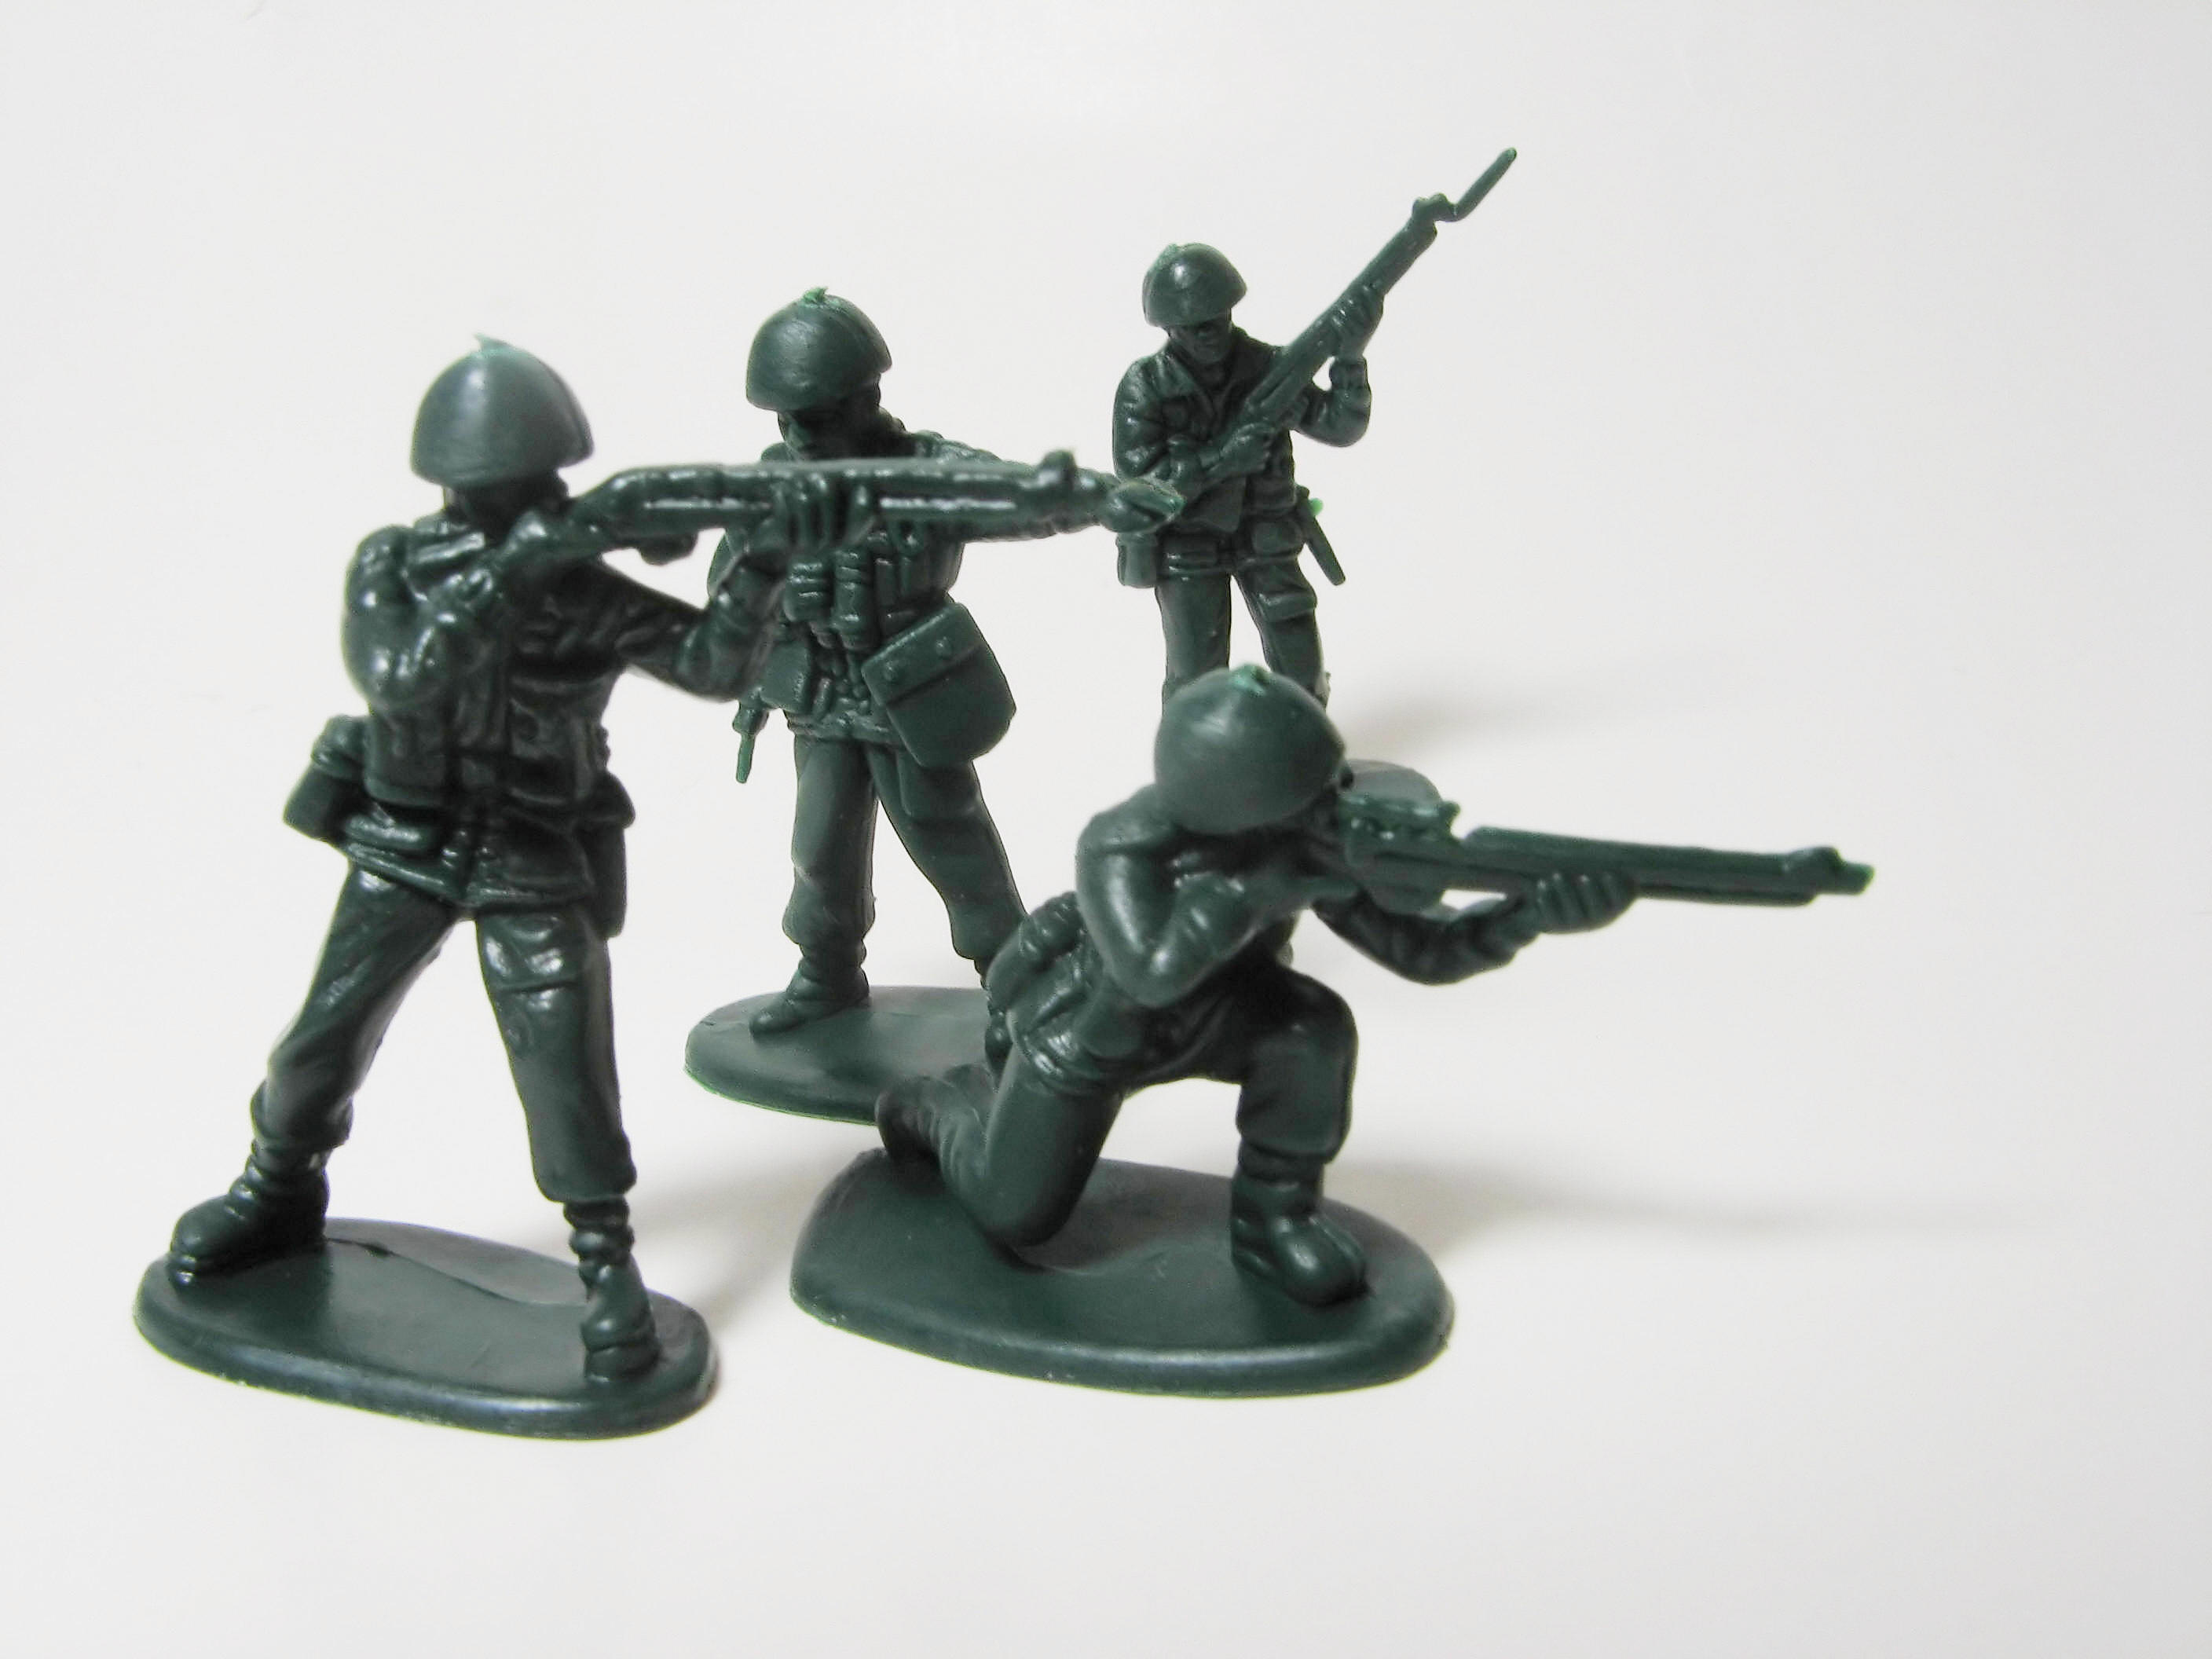 "Play Toy Soldiers, around Real Soldiers" Episode 68